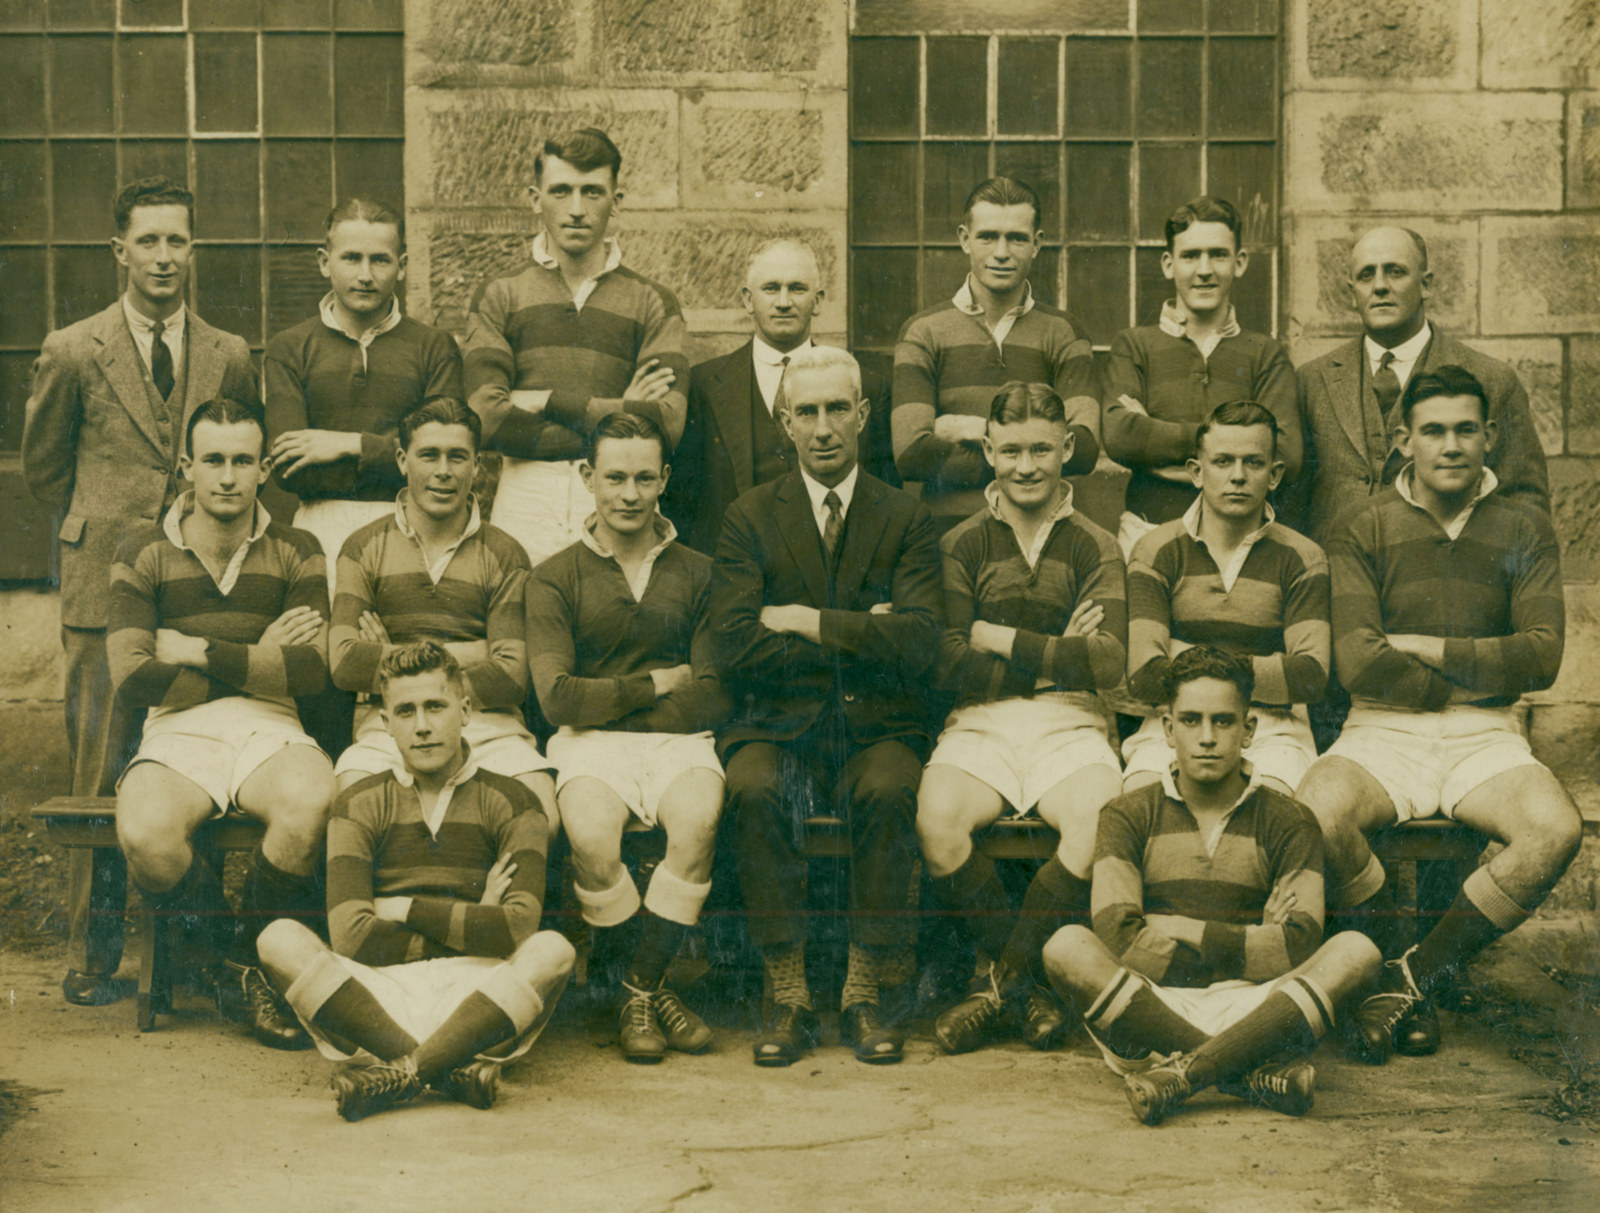 Group portrait of men's football team, players wearing striped jerseys, boots, socks and white shorts. There is a signle suited man in the centre of the group. A stone wall with large multi panelled windows is at the rear.